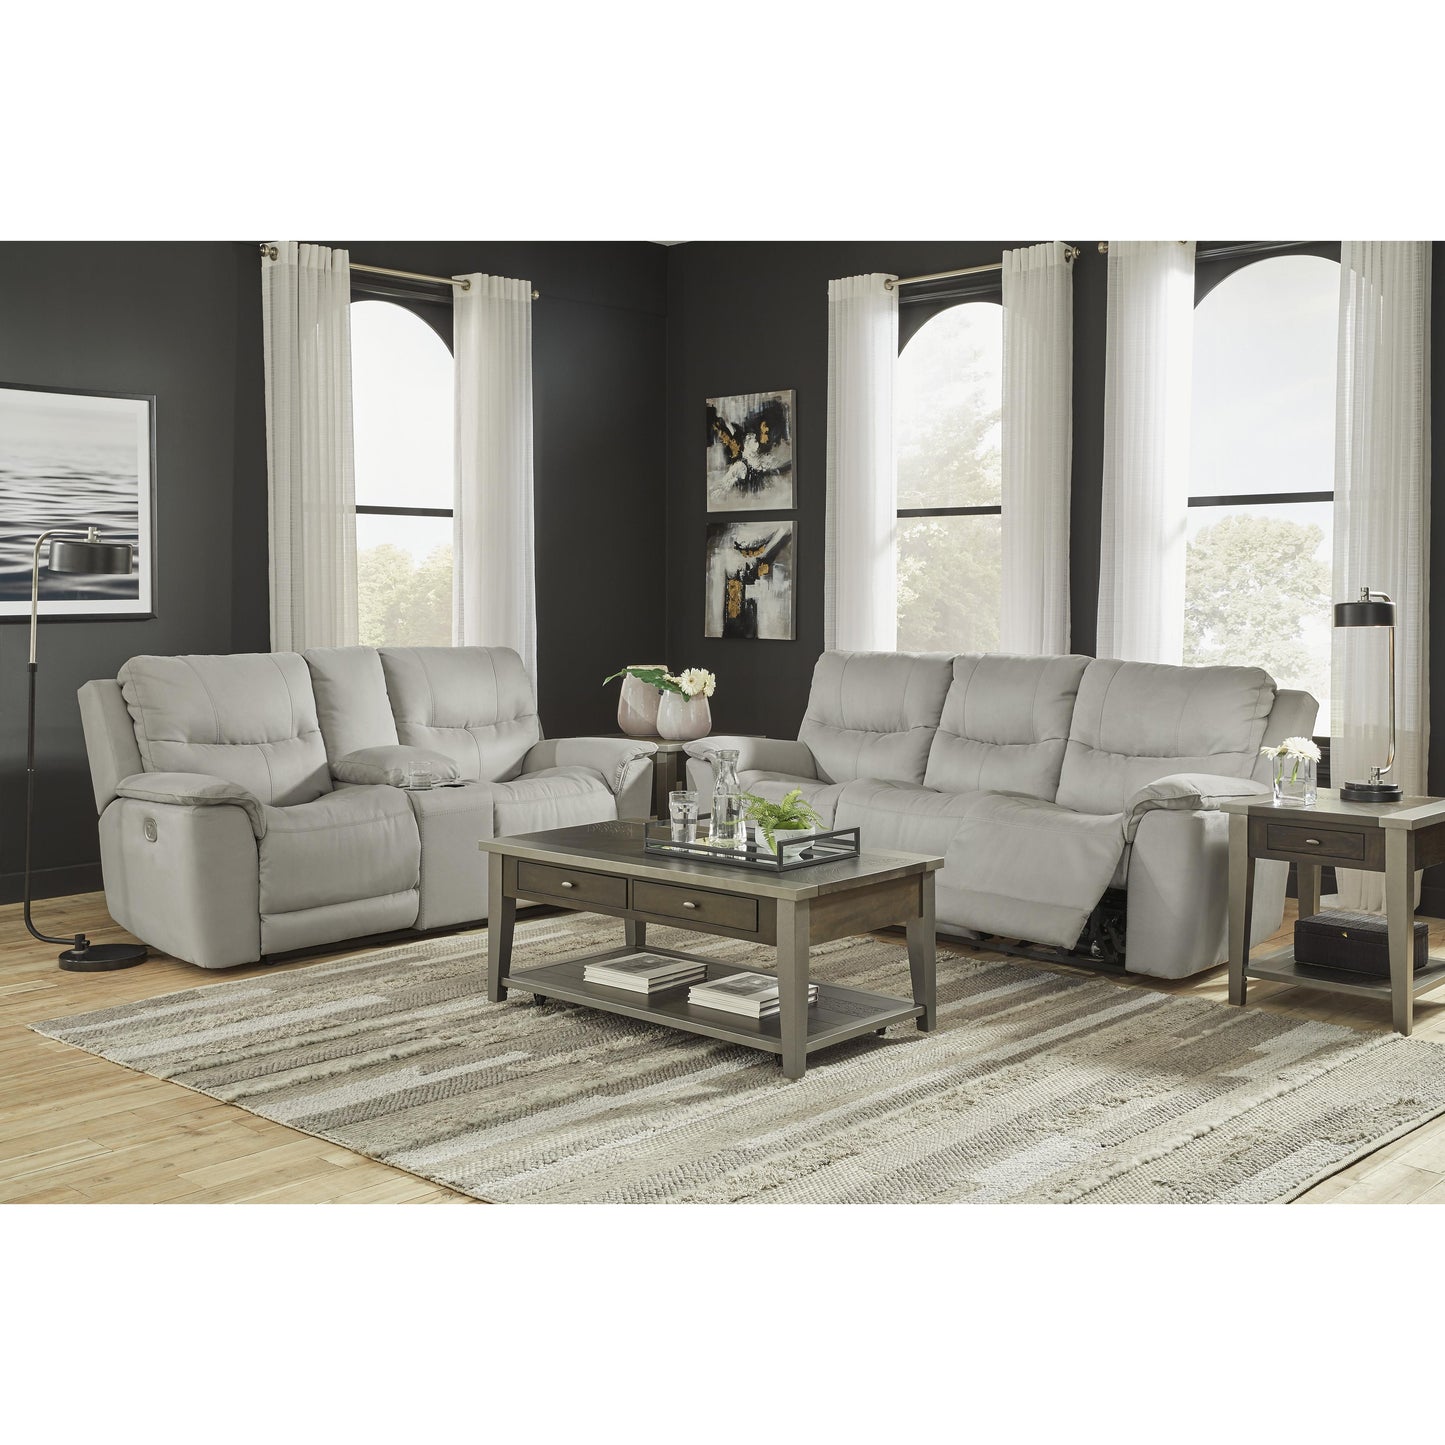 Signature Design by Ashley Next-Gen Gaucho Power Reclining Leather Look Sofa 6080615 IMAGE 11